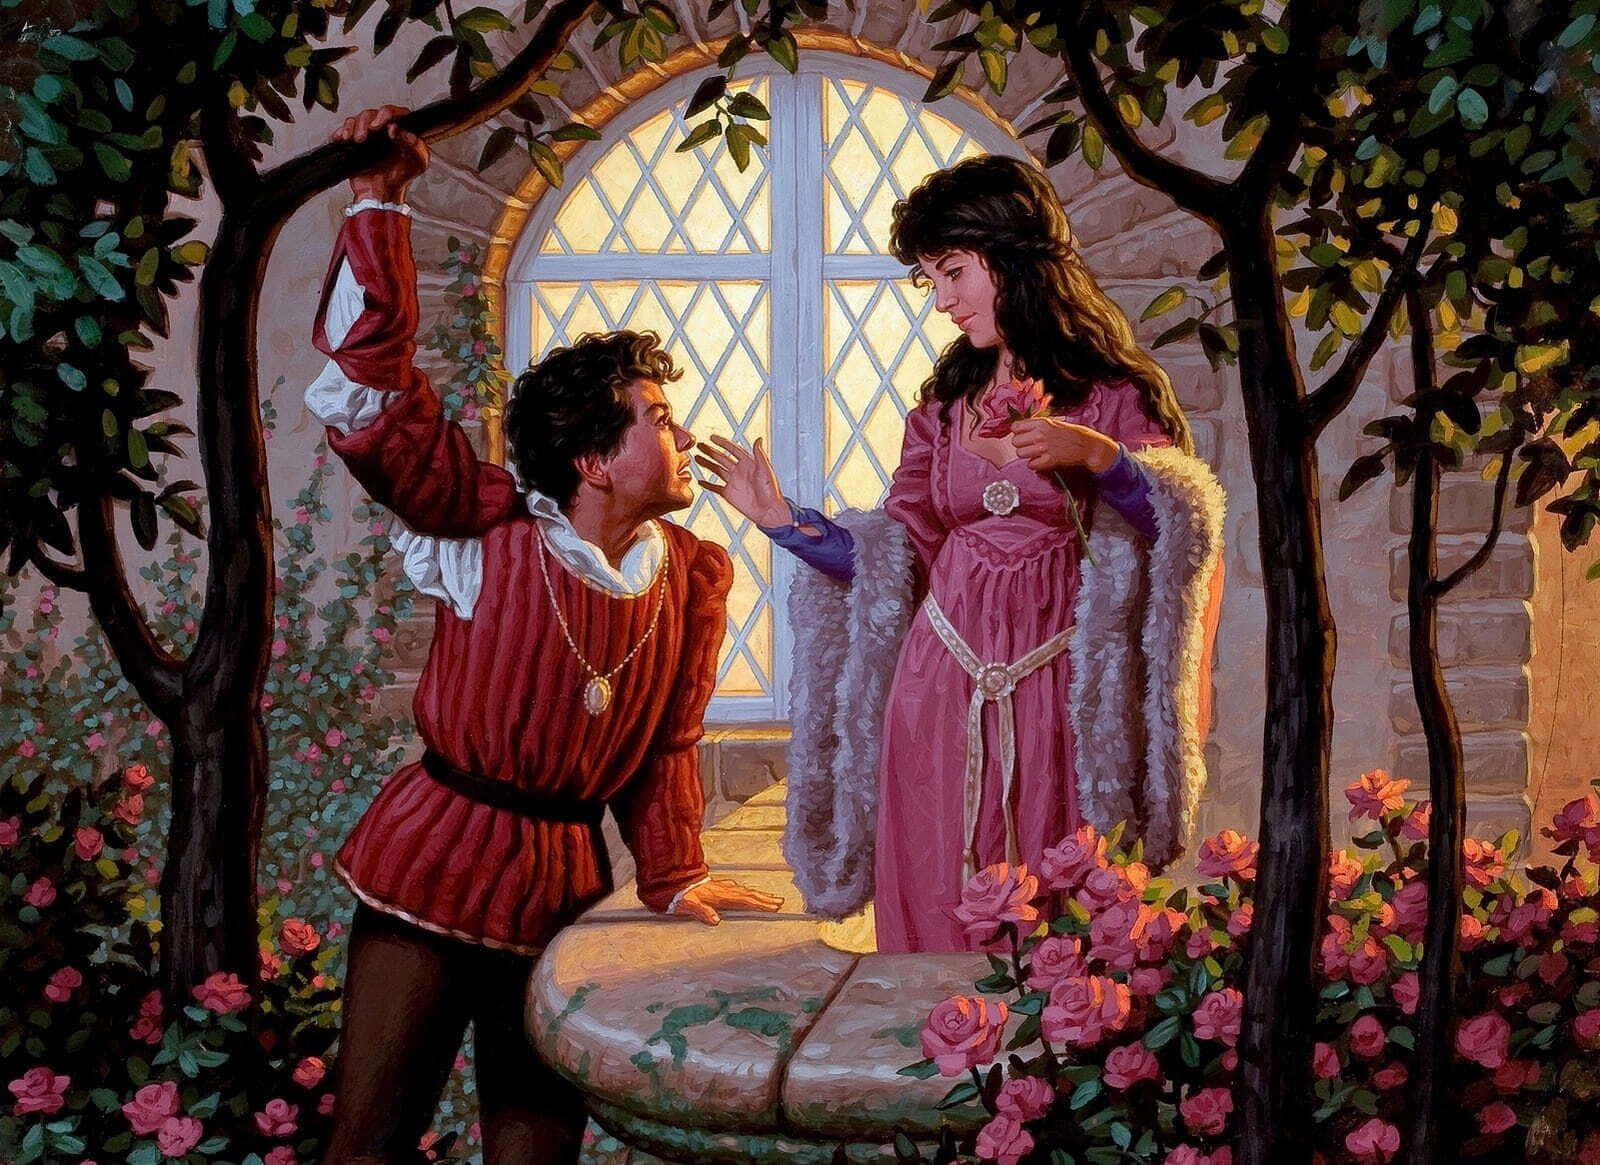 A True Love Story - Romeo and Juliet